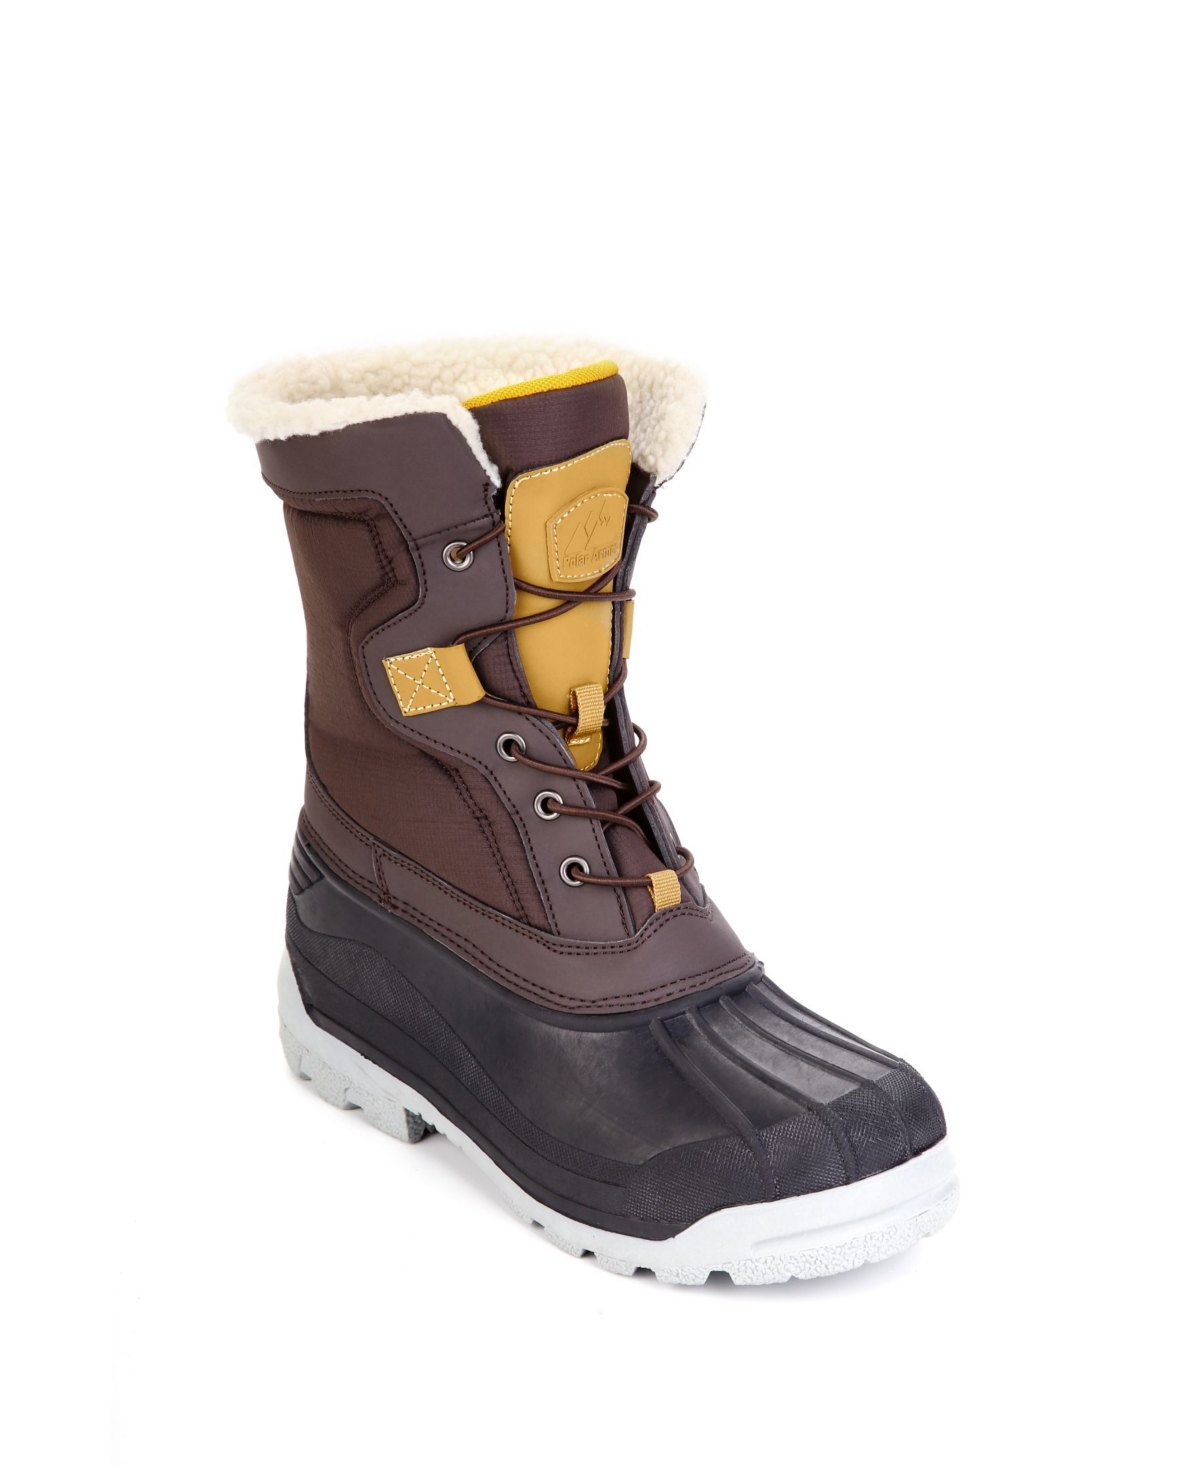 Men's All-Weather Inner Faux Fur Snow Boots - Brown